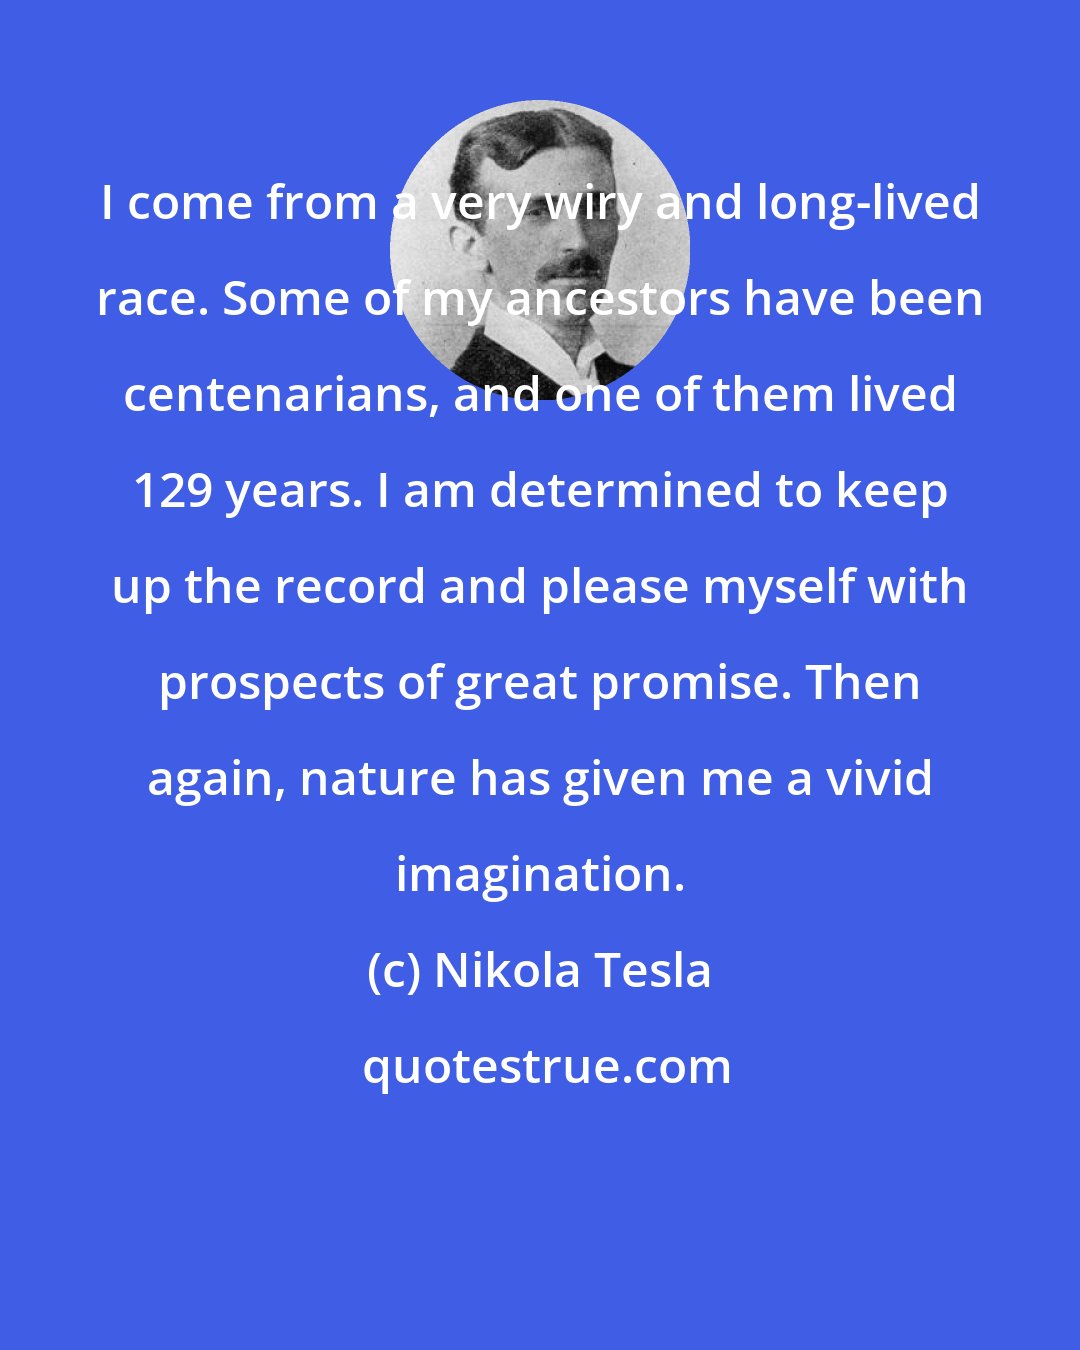 Nikola Tesla: I come from a very wiry and long-lived race. Some of my ancestors have been centenarians, and one of them lived 129 years. I am determined to keep up the record and please myself with prospects of great promise. Then again, nature has given me a vivid imagination.